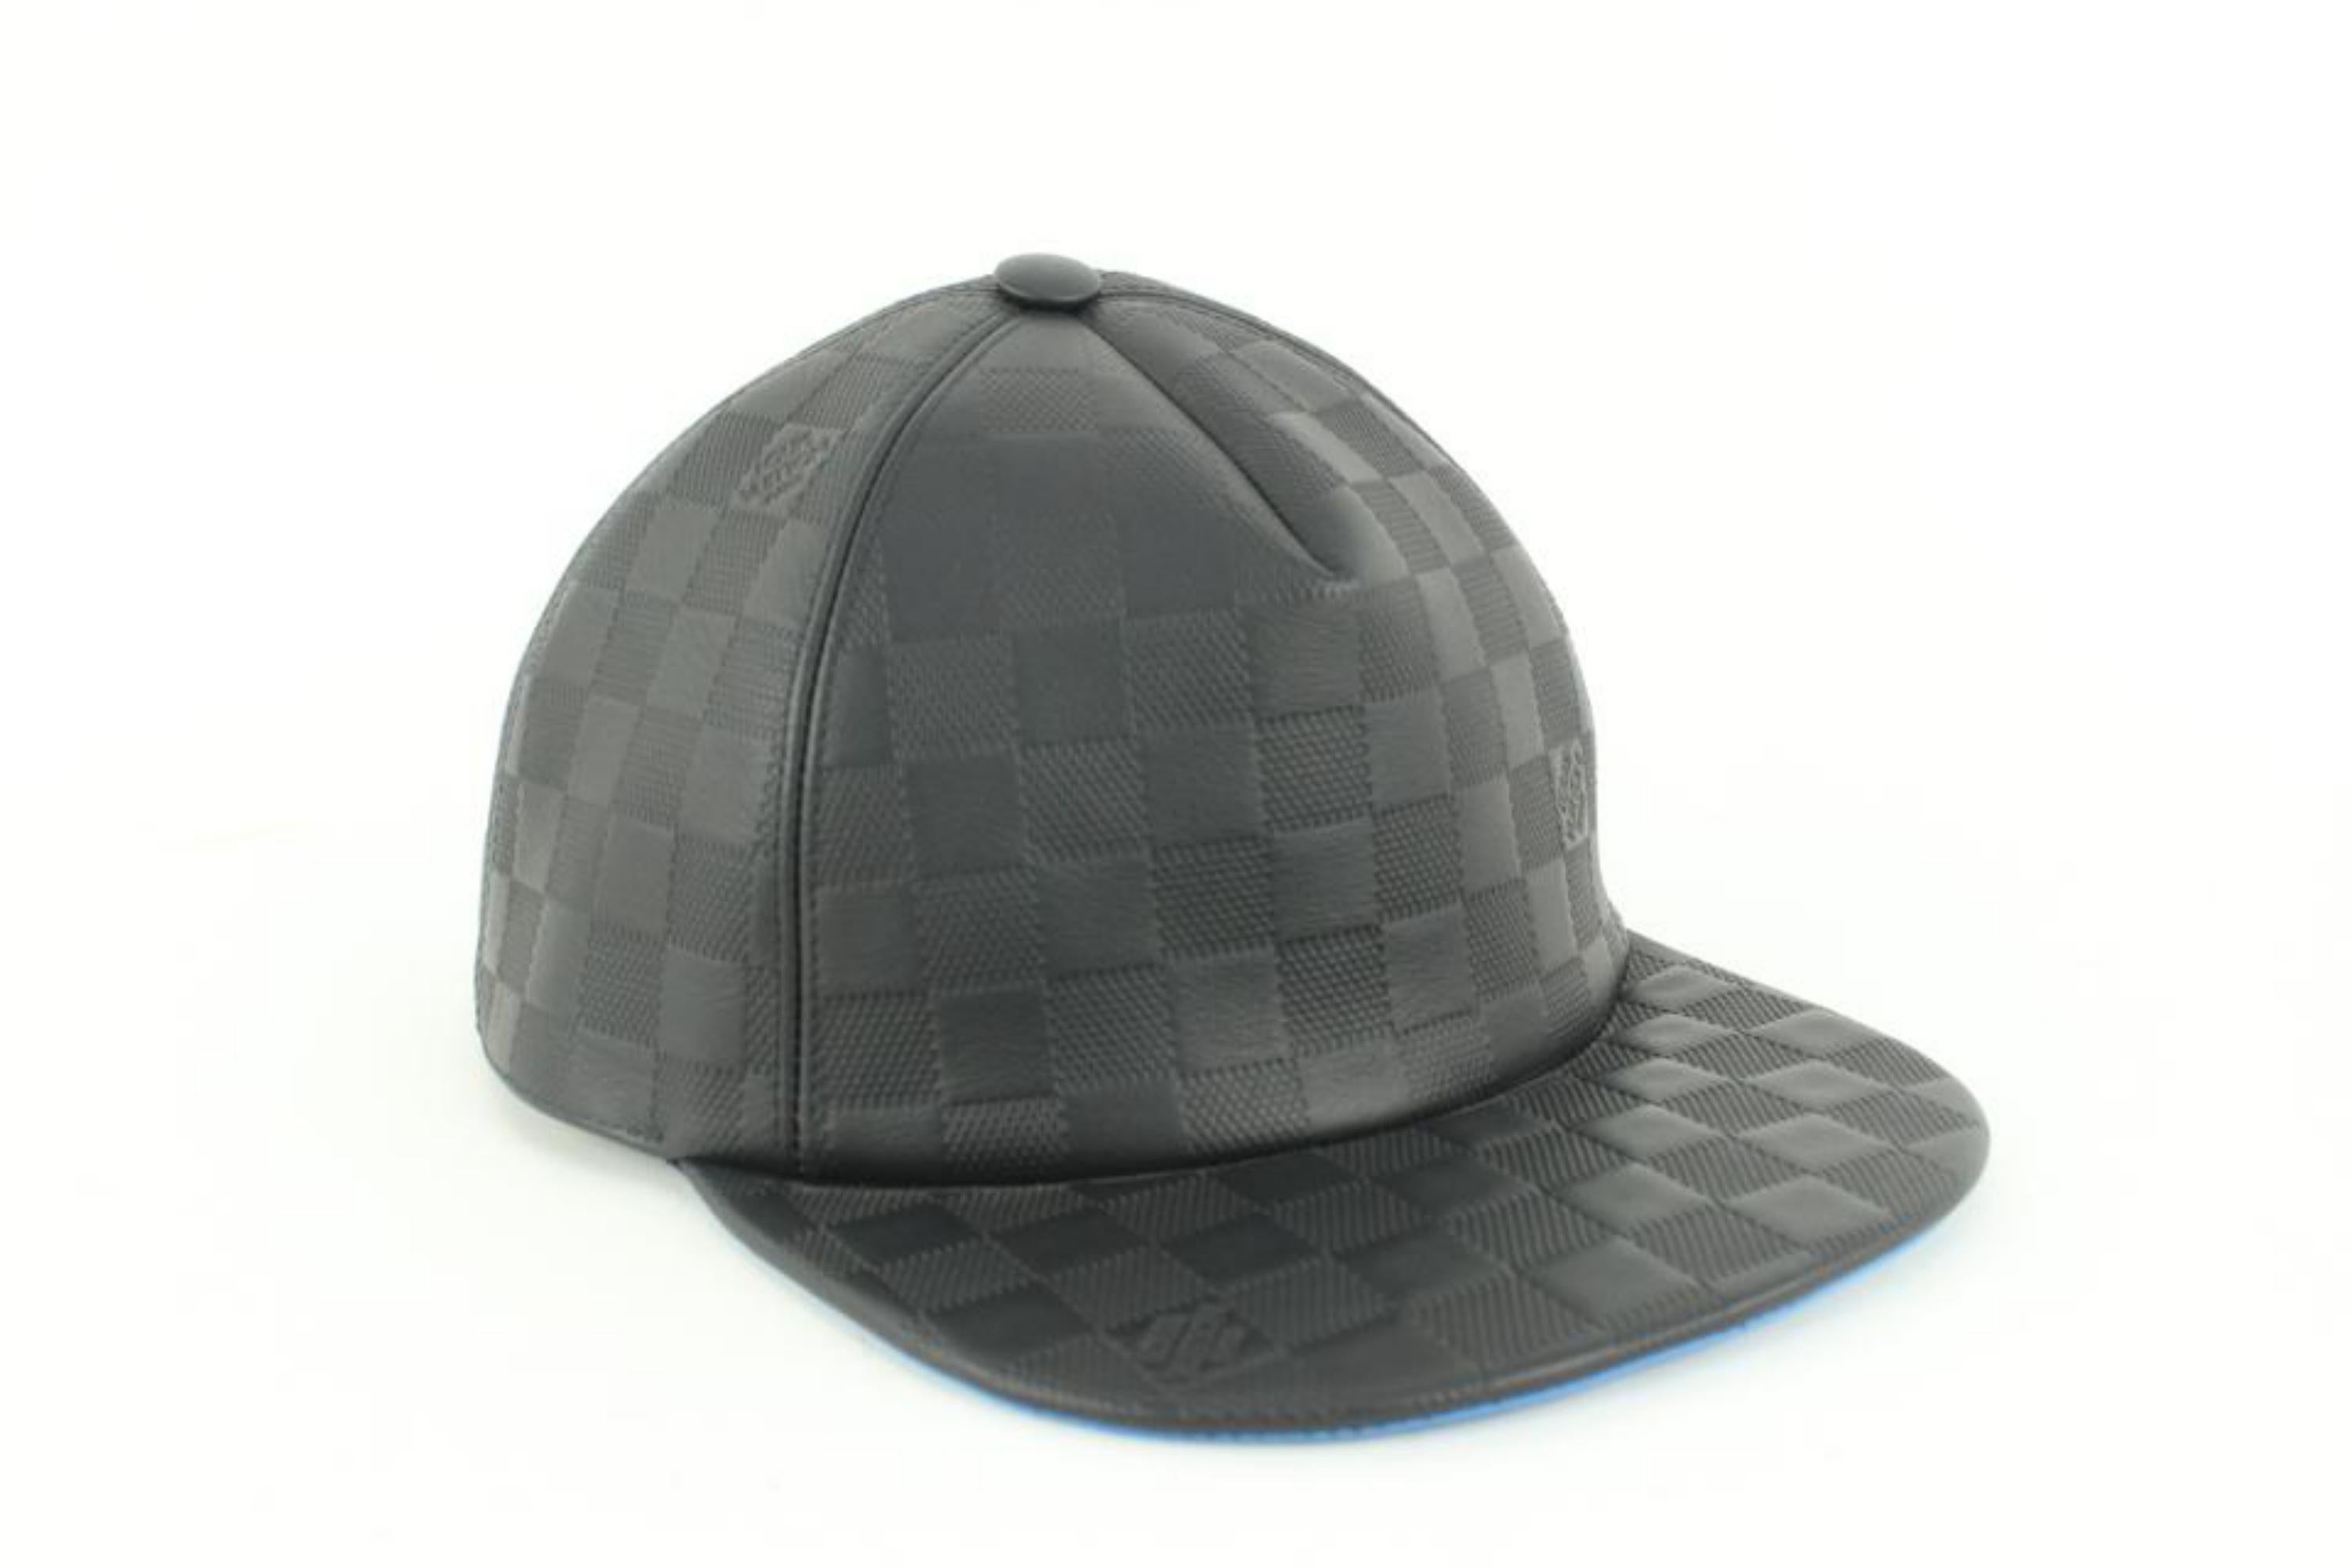 Louis Vuitton 21FW Black x Blue Leather Damier Infini Baseball Cap Hat 16lv45 In New Condition For Sale In Dix hills, NY